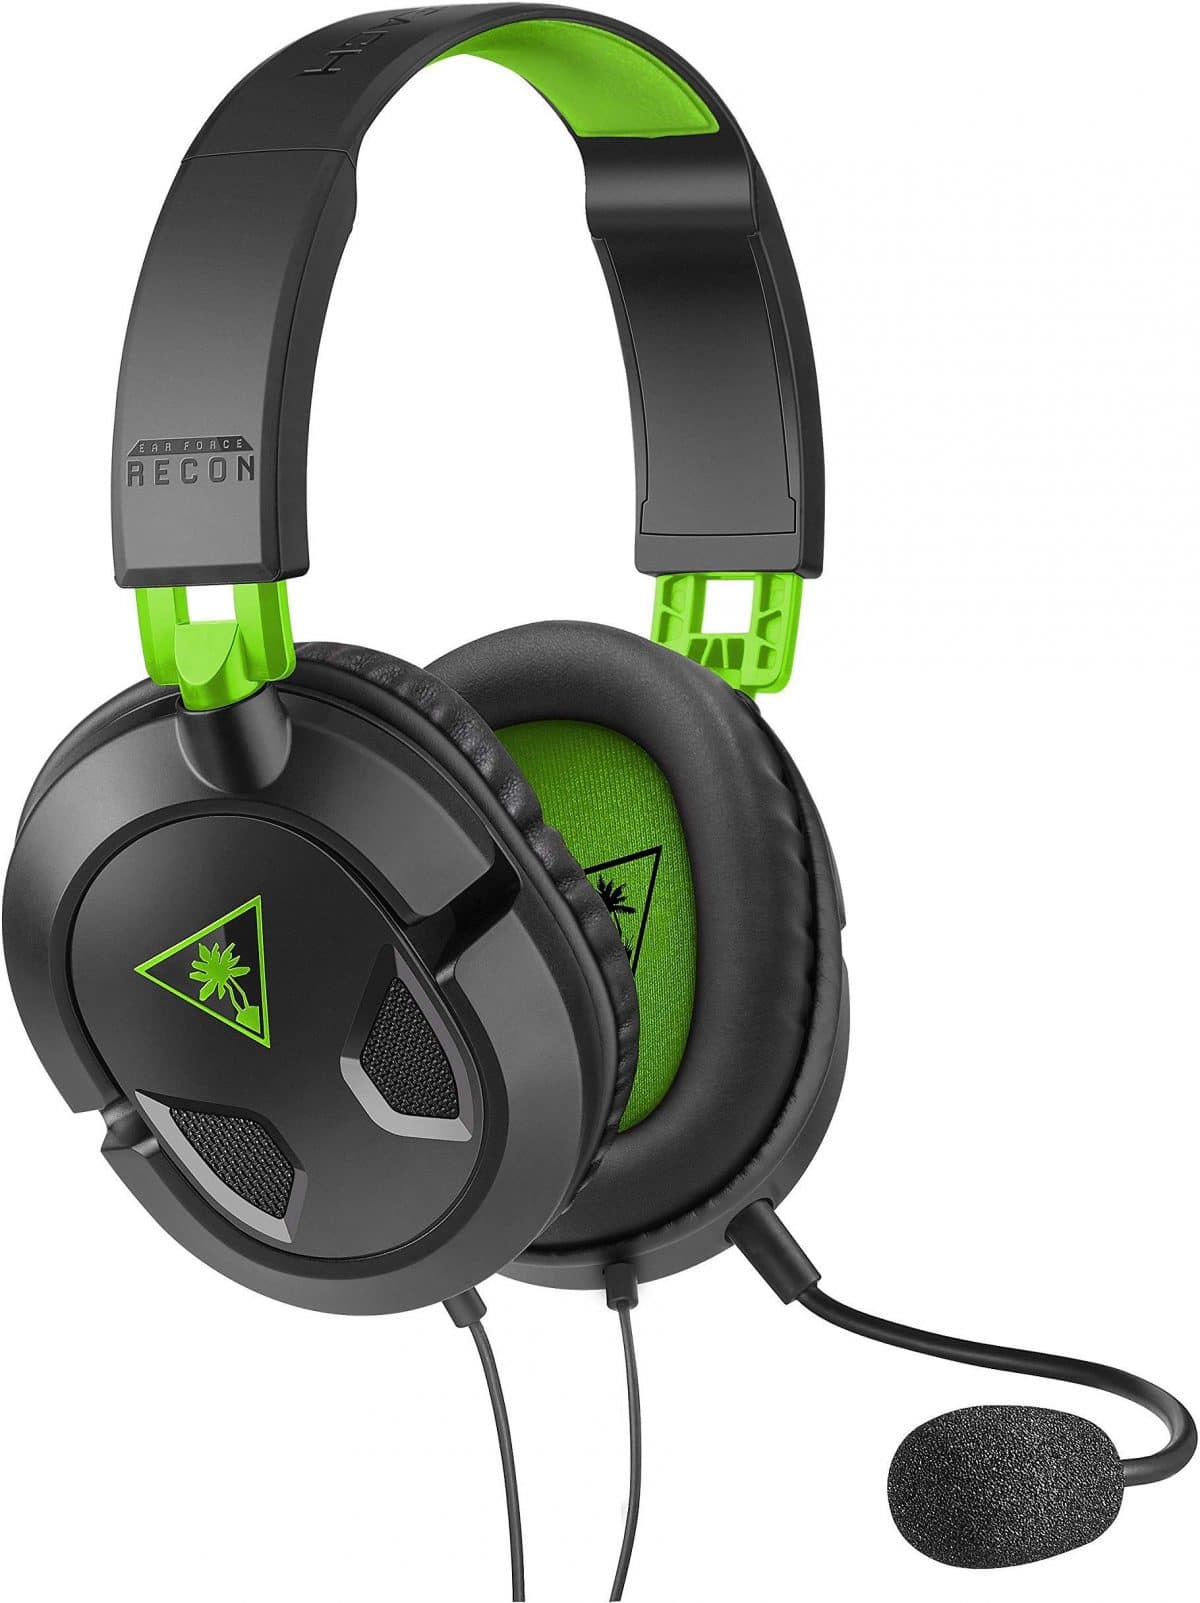 good headset for xbox one